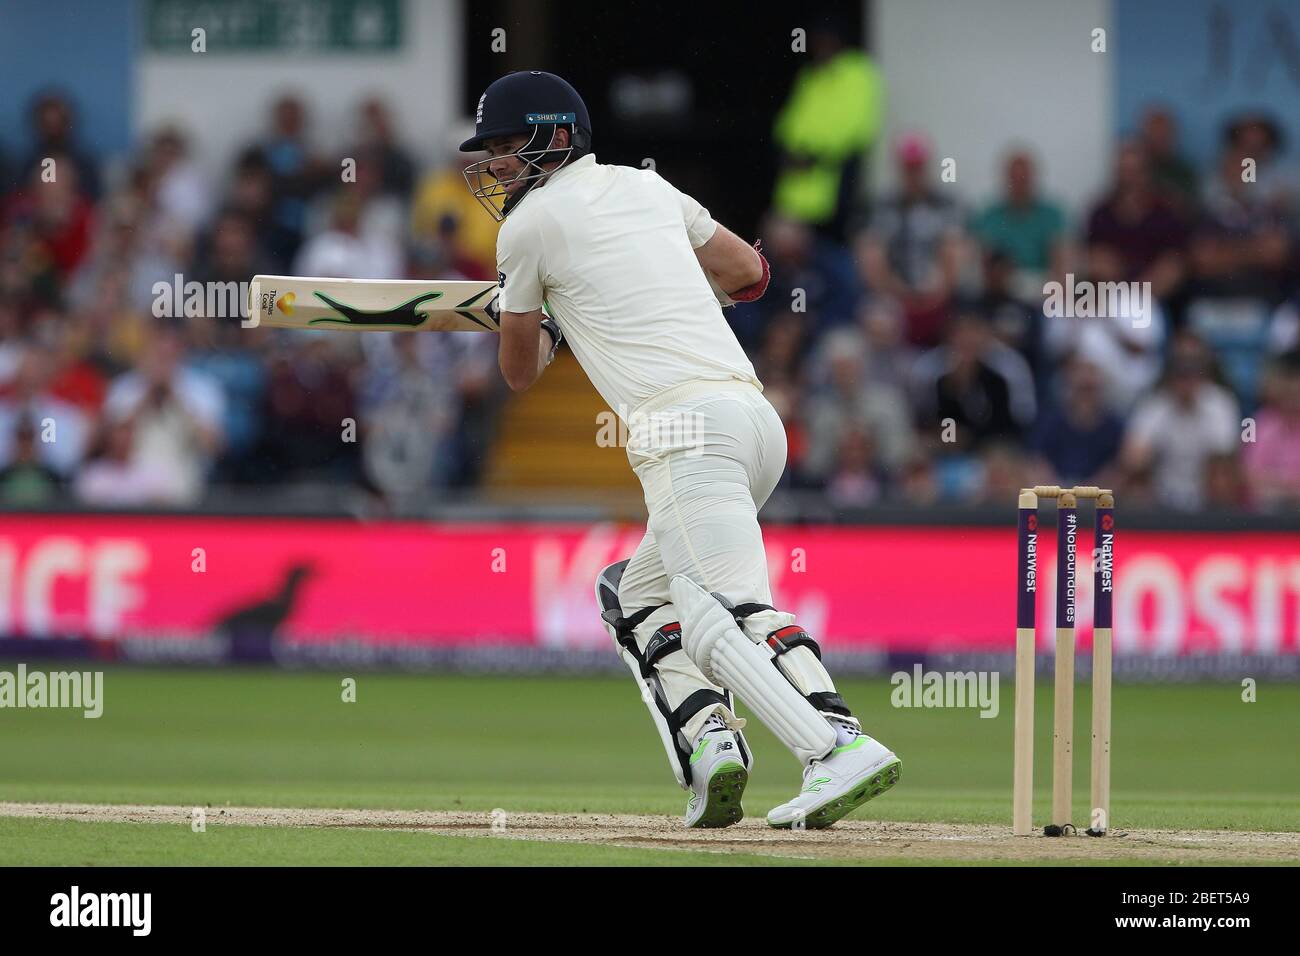 LEEDS, UK - JUNE 3rd James Anderson of England batting during the third day of the Second Nat West Test match between England and Pakistan at Headingley Cricket Ground, Leeds on Sunday 3rd June 2018. (Credit: Mark Fletcher | MI News) Stock Photo